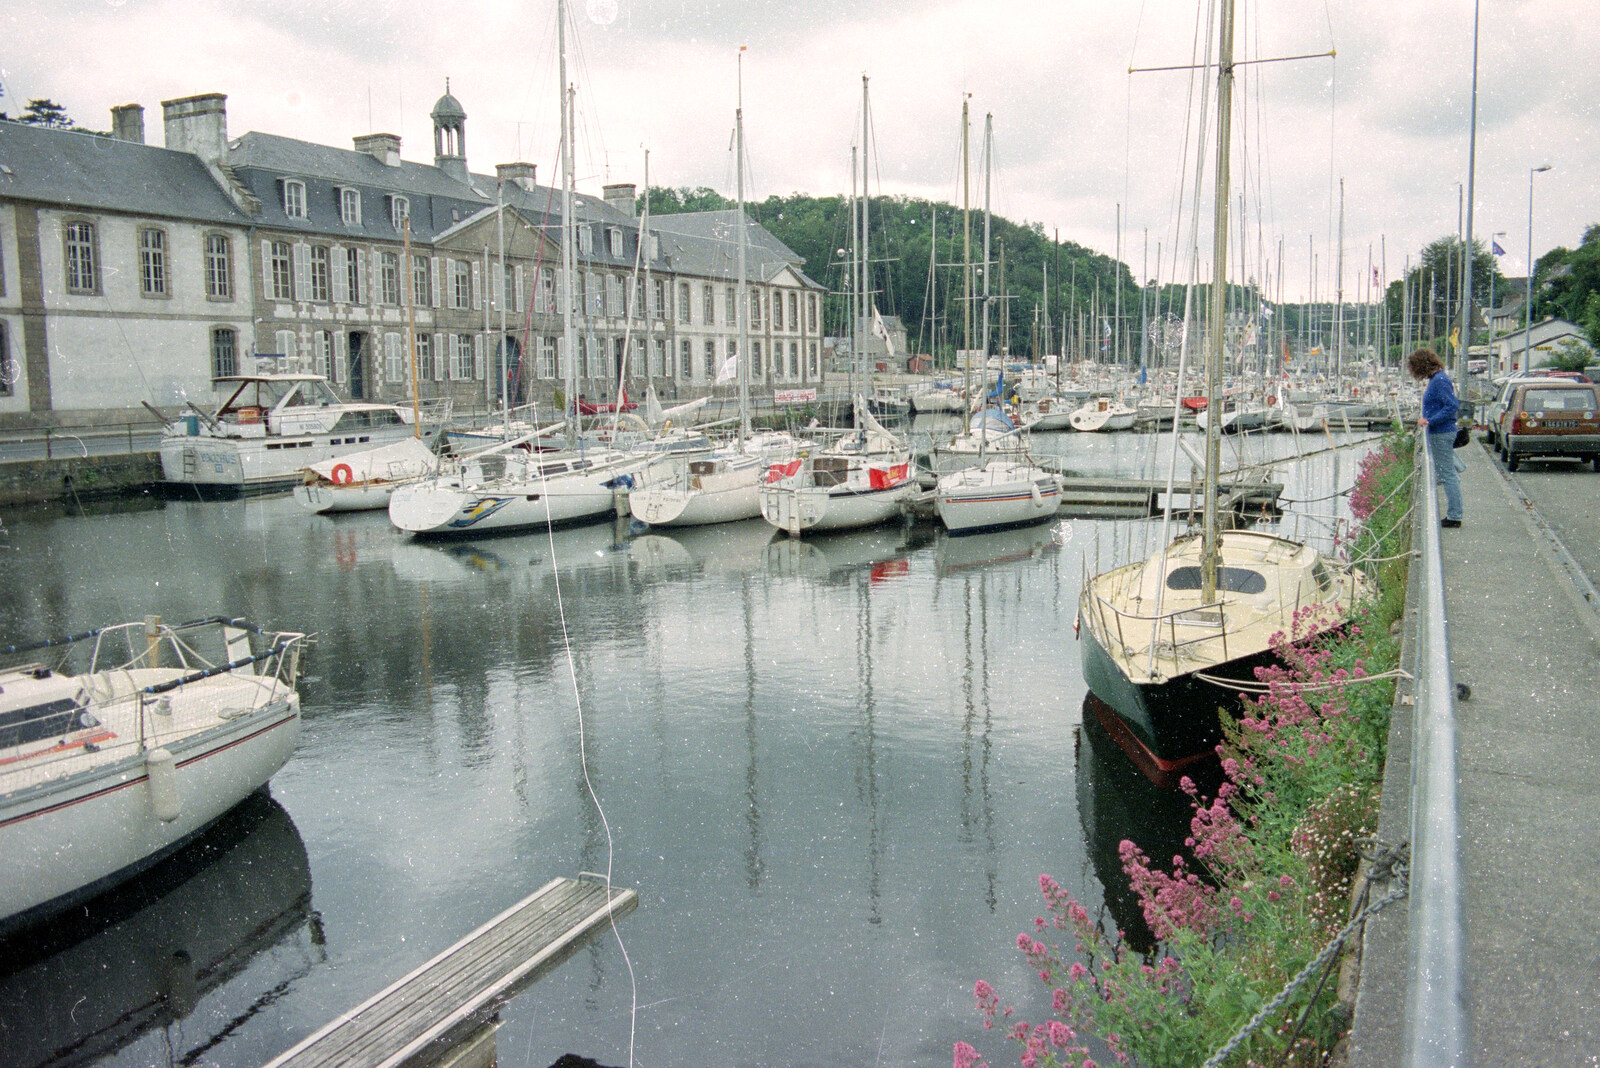  from A Trip To Huelgoat, Brittany, France - 11th June 1990